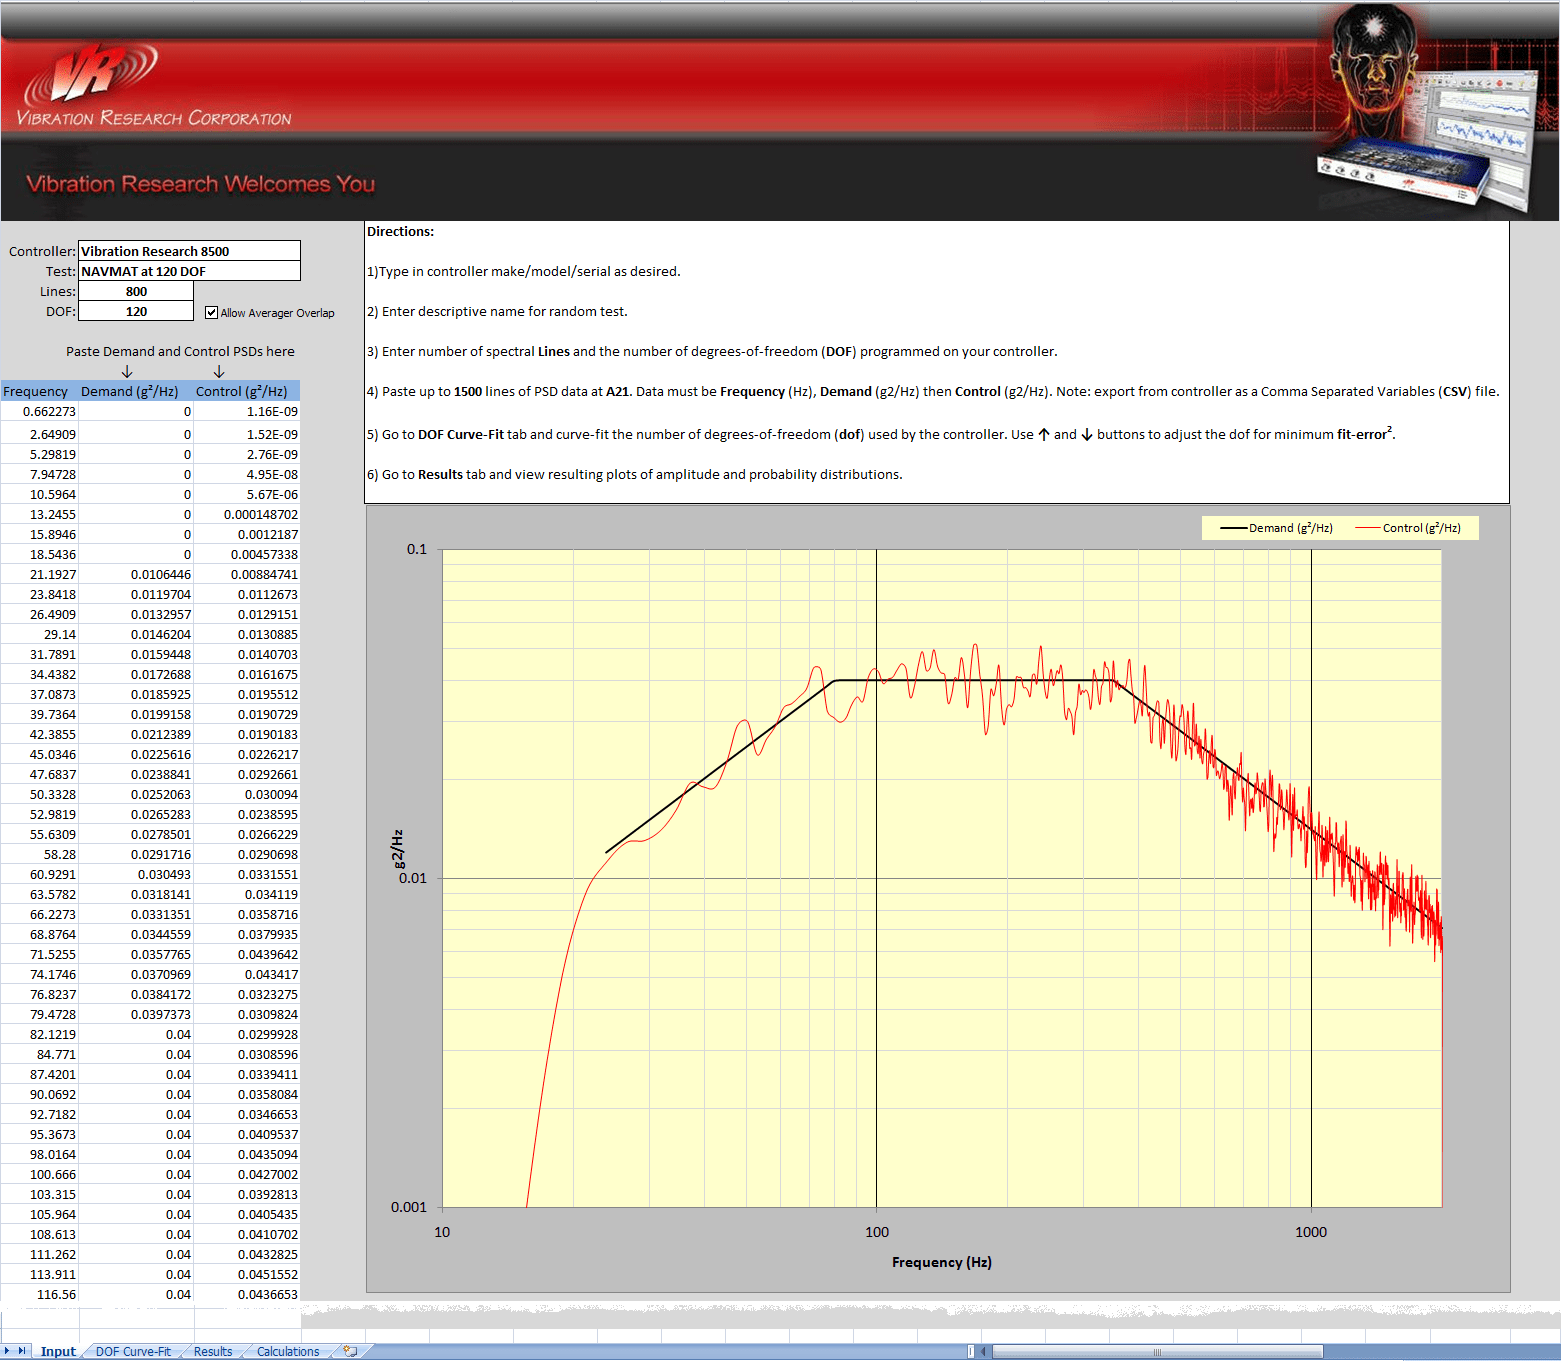 Figure 11: Input tab of the VRC Control Statistics spreadsheet with NAVMAT test on 8500.